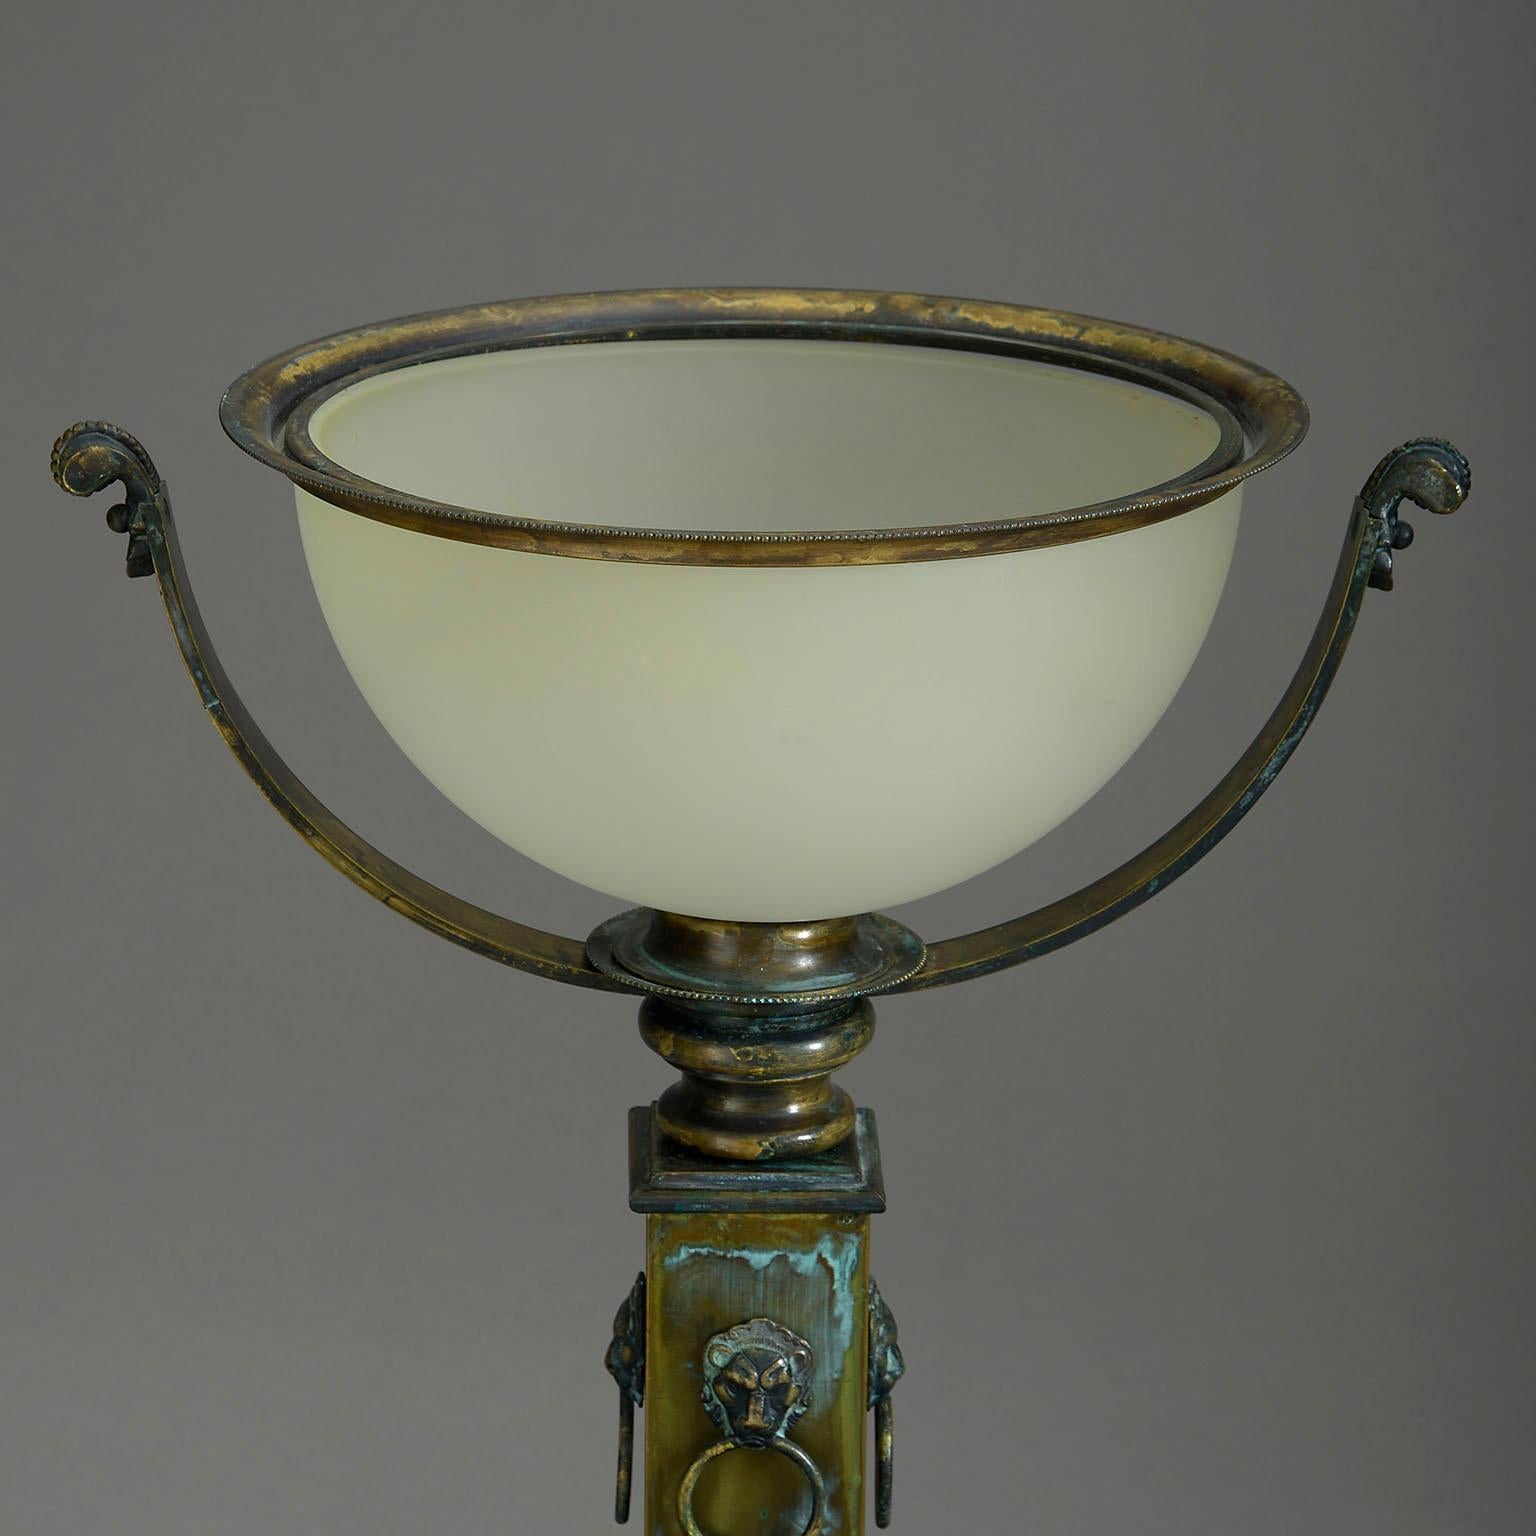 Neoclassical Revival Mid-Century Classical Bronzed Dish Light For Sale